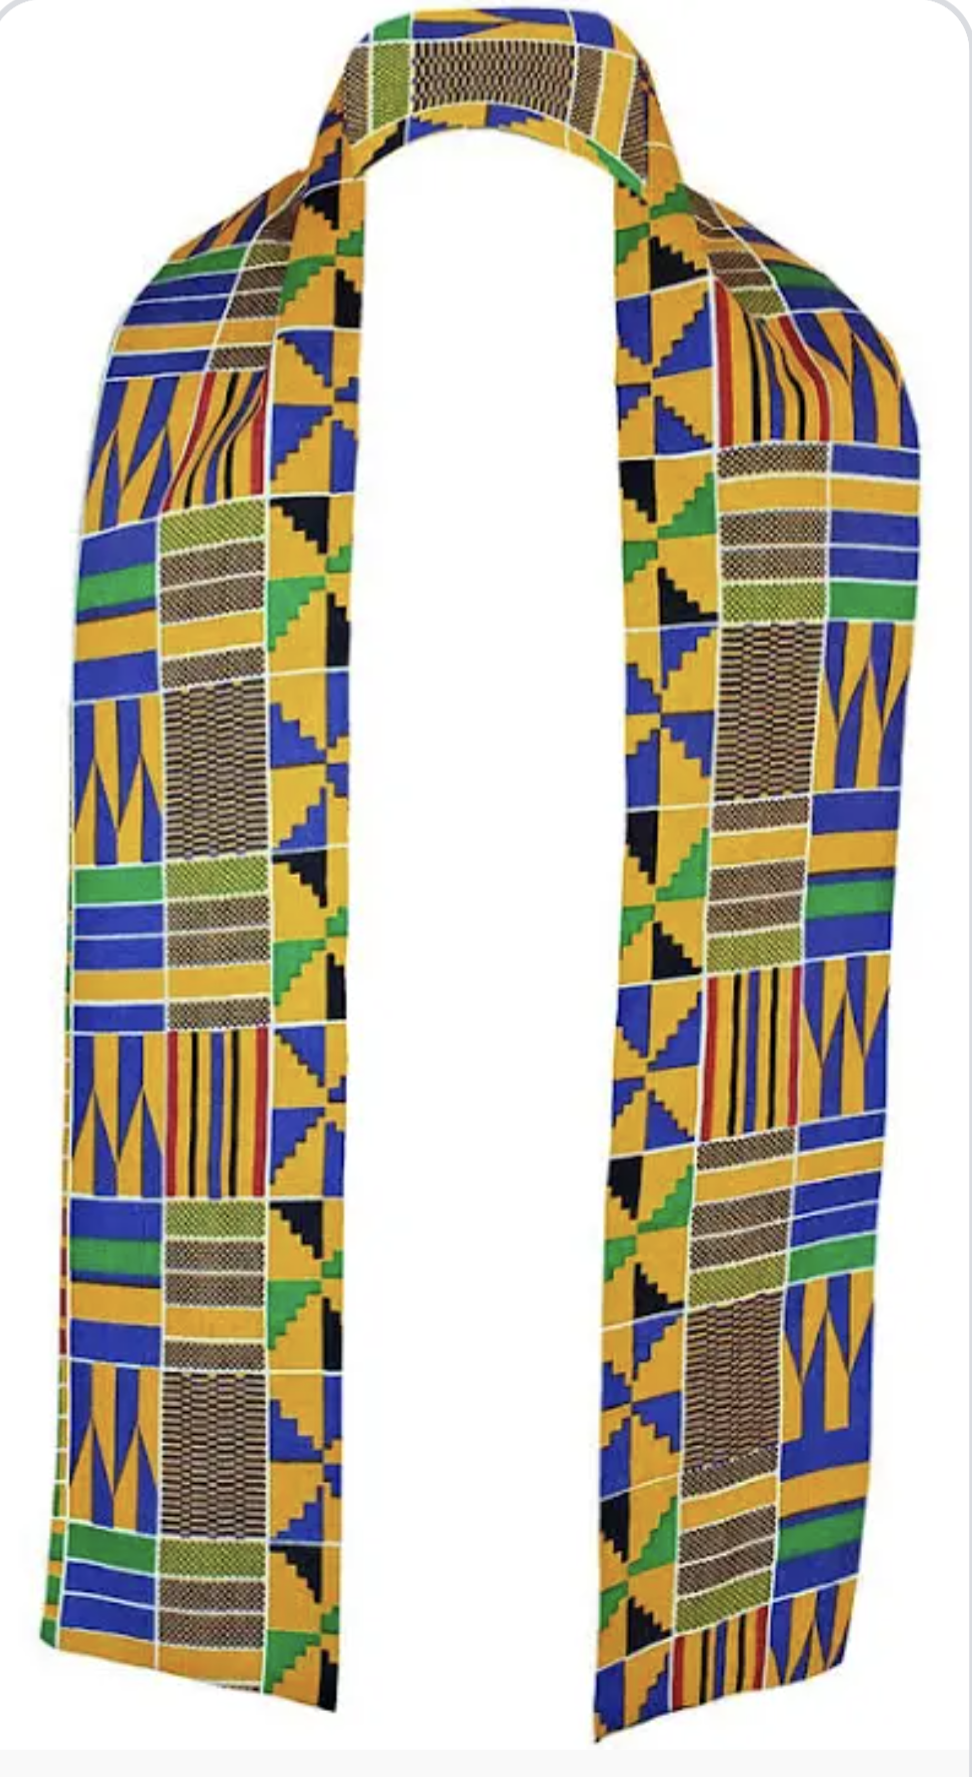 Dupsie's Akannipa Kente African Print Stole/Sash-Made with Pride in Africa Perfect for Black History Celebrations, Events, and Cultural Showcases, Choir, Clergy, Church, Schools and more DP4075S